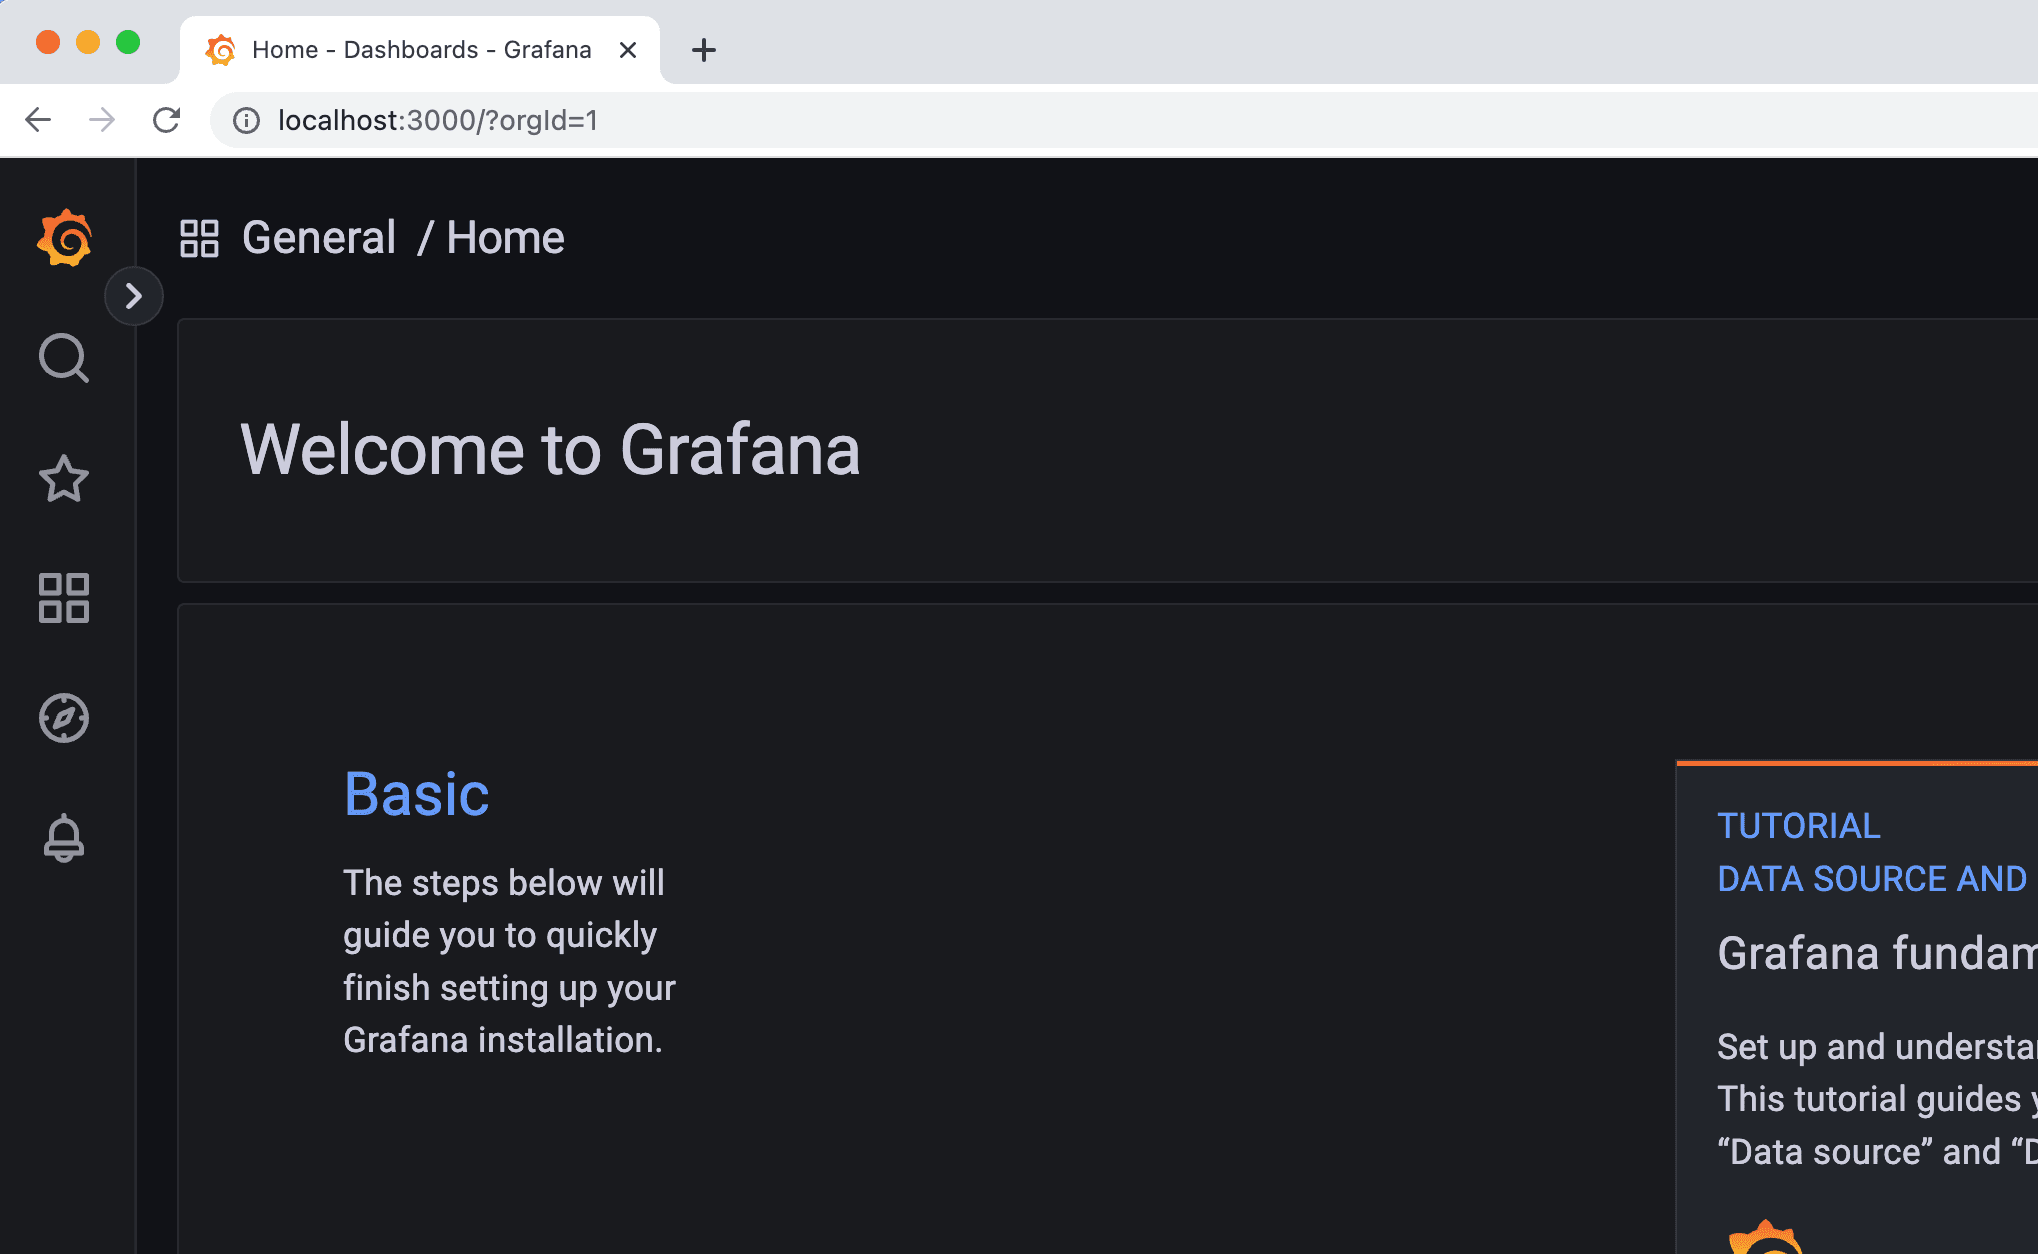 Page showing "Welcome to Grafana" and basic instructions